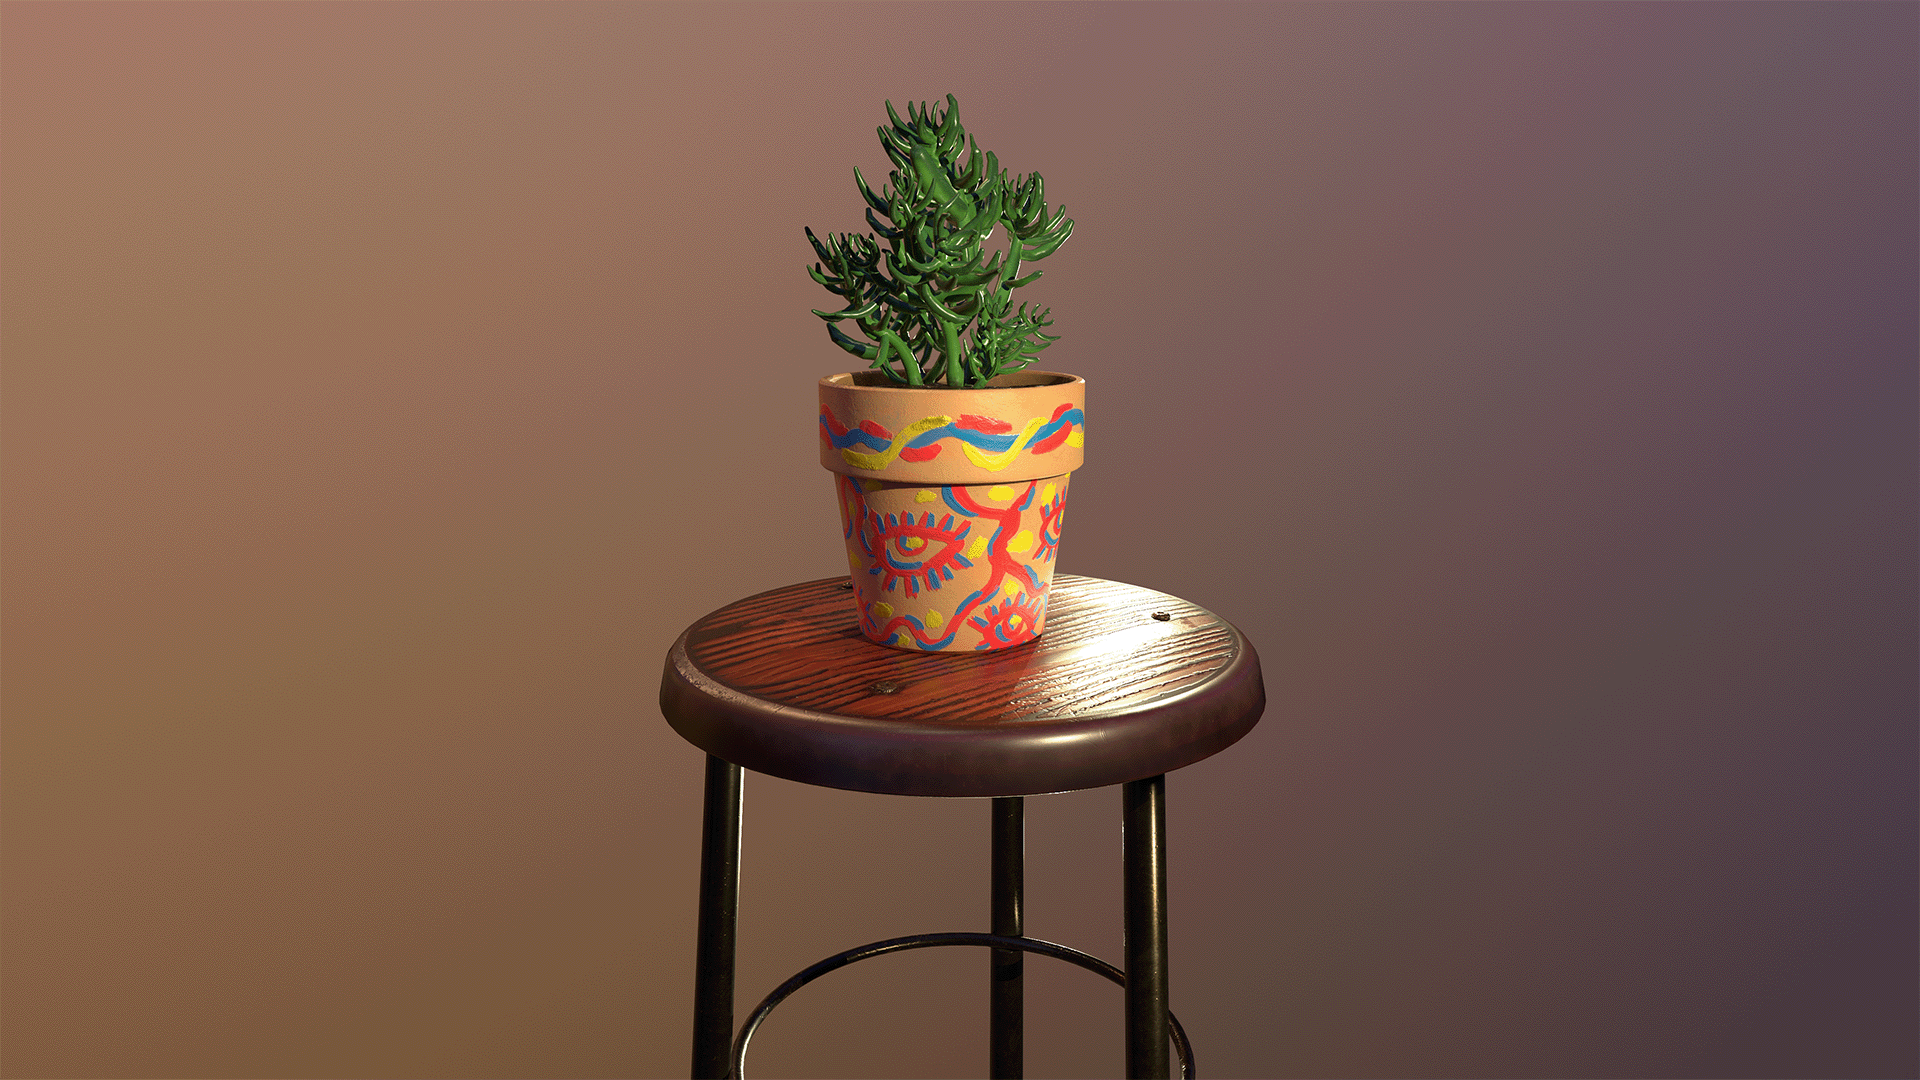 A video render of 3D modelled green succulent on top of a brown three-legged stool.